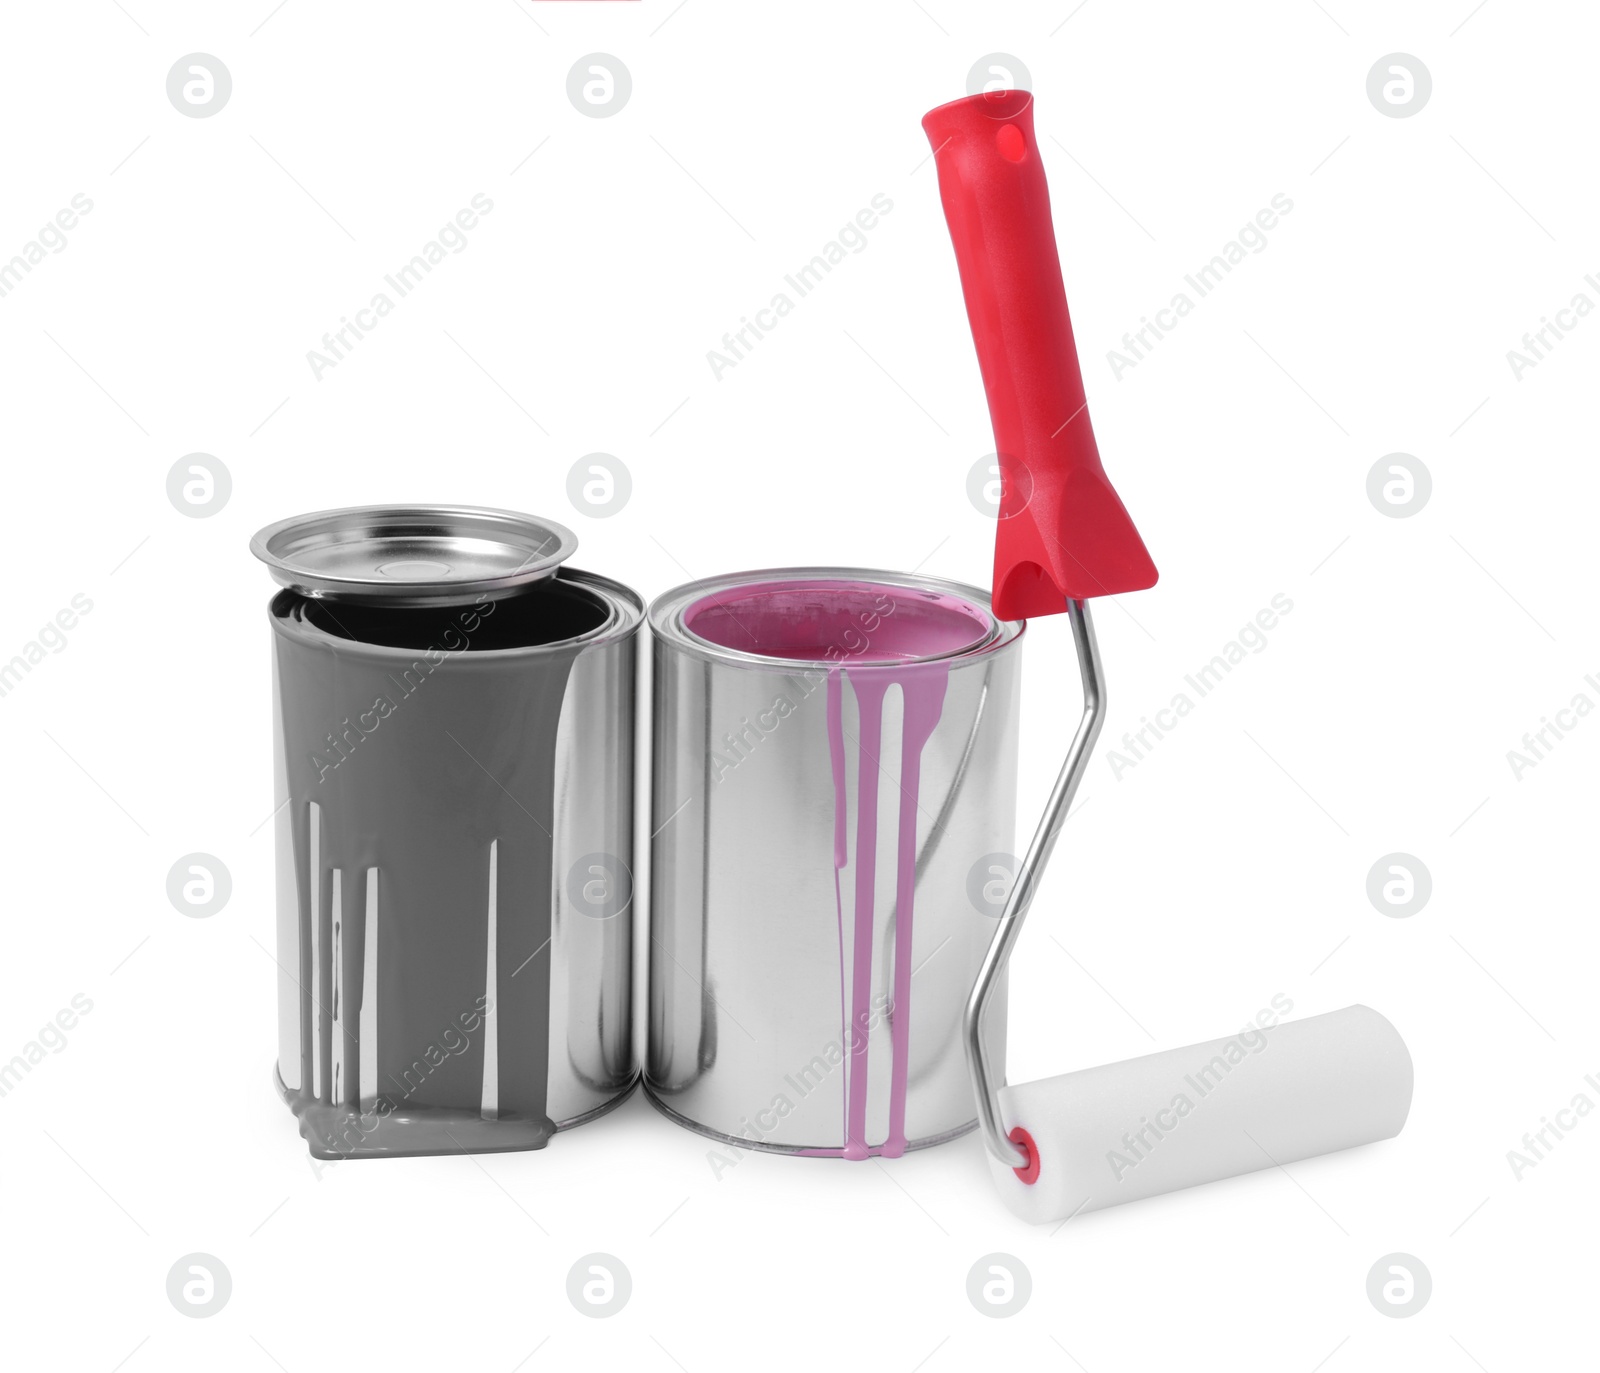 Photo of Cans of grey and pink paints and roller isolated on white